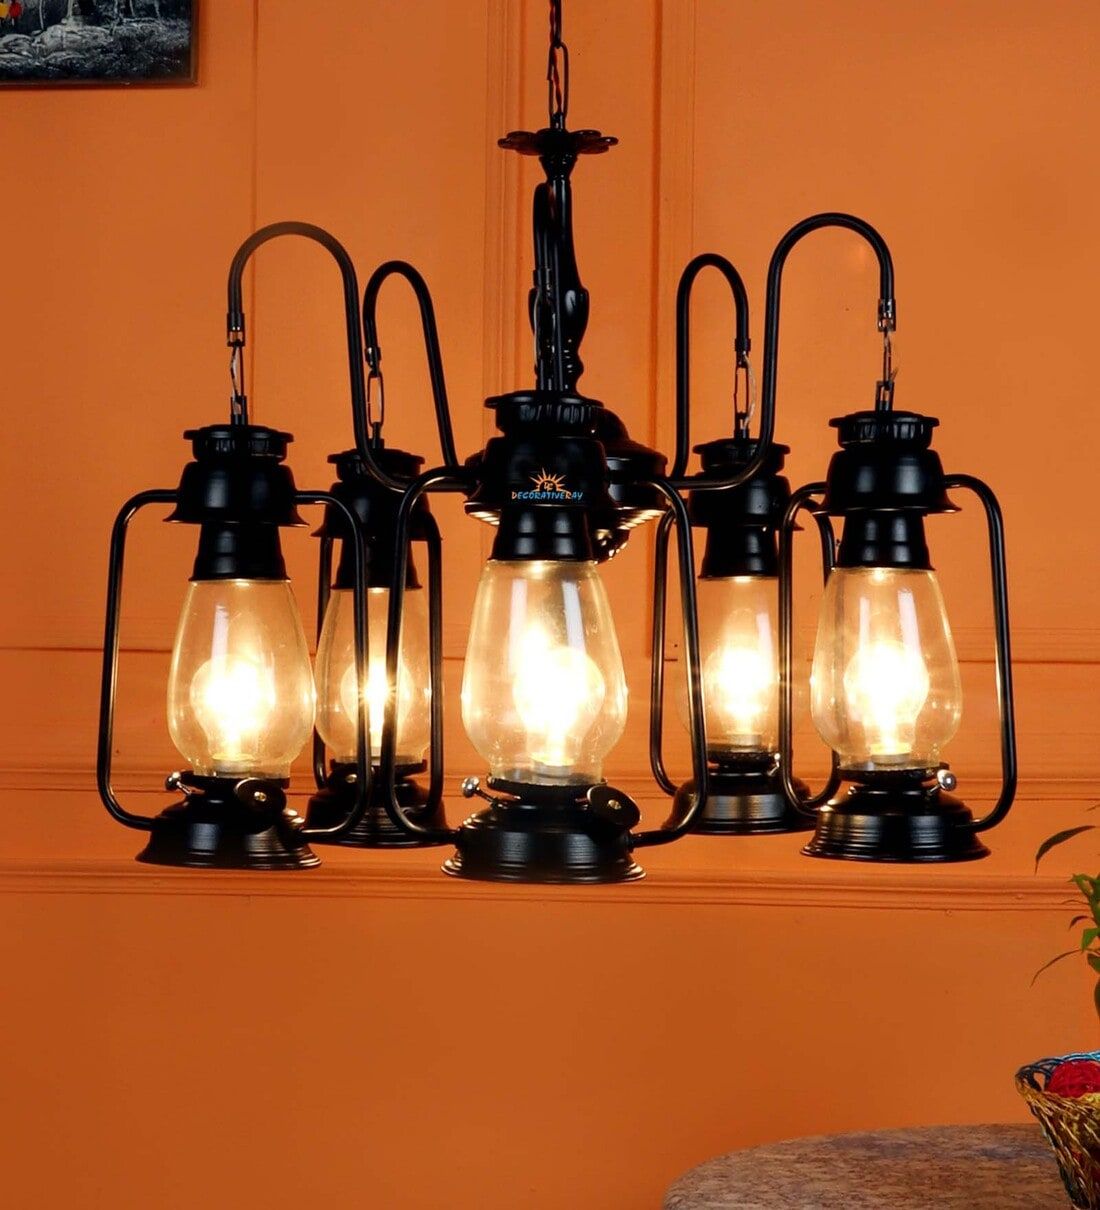 Buy Black Lantern Chandelier In Clear Glassdecorativeray Online –  Shaded Chandeliers – Chandeliers – Lamps And Lighting – Pepperfry Product With Regard To Rustic Black Lantern Chandeliers (View 11 of 15)